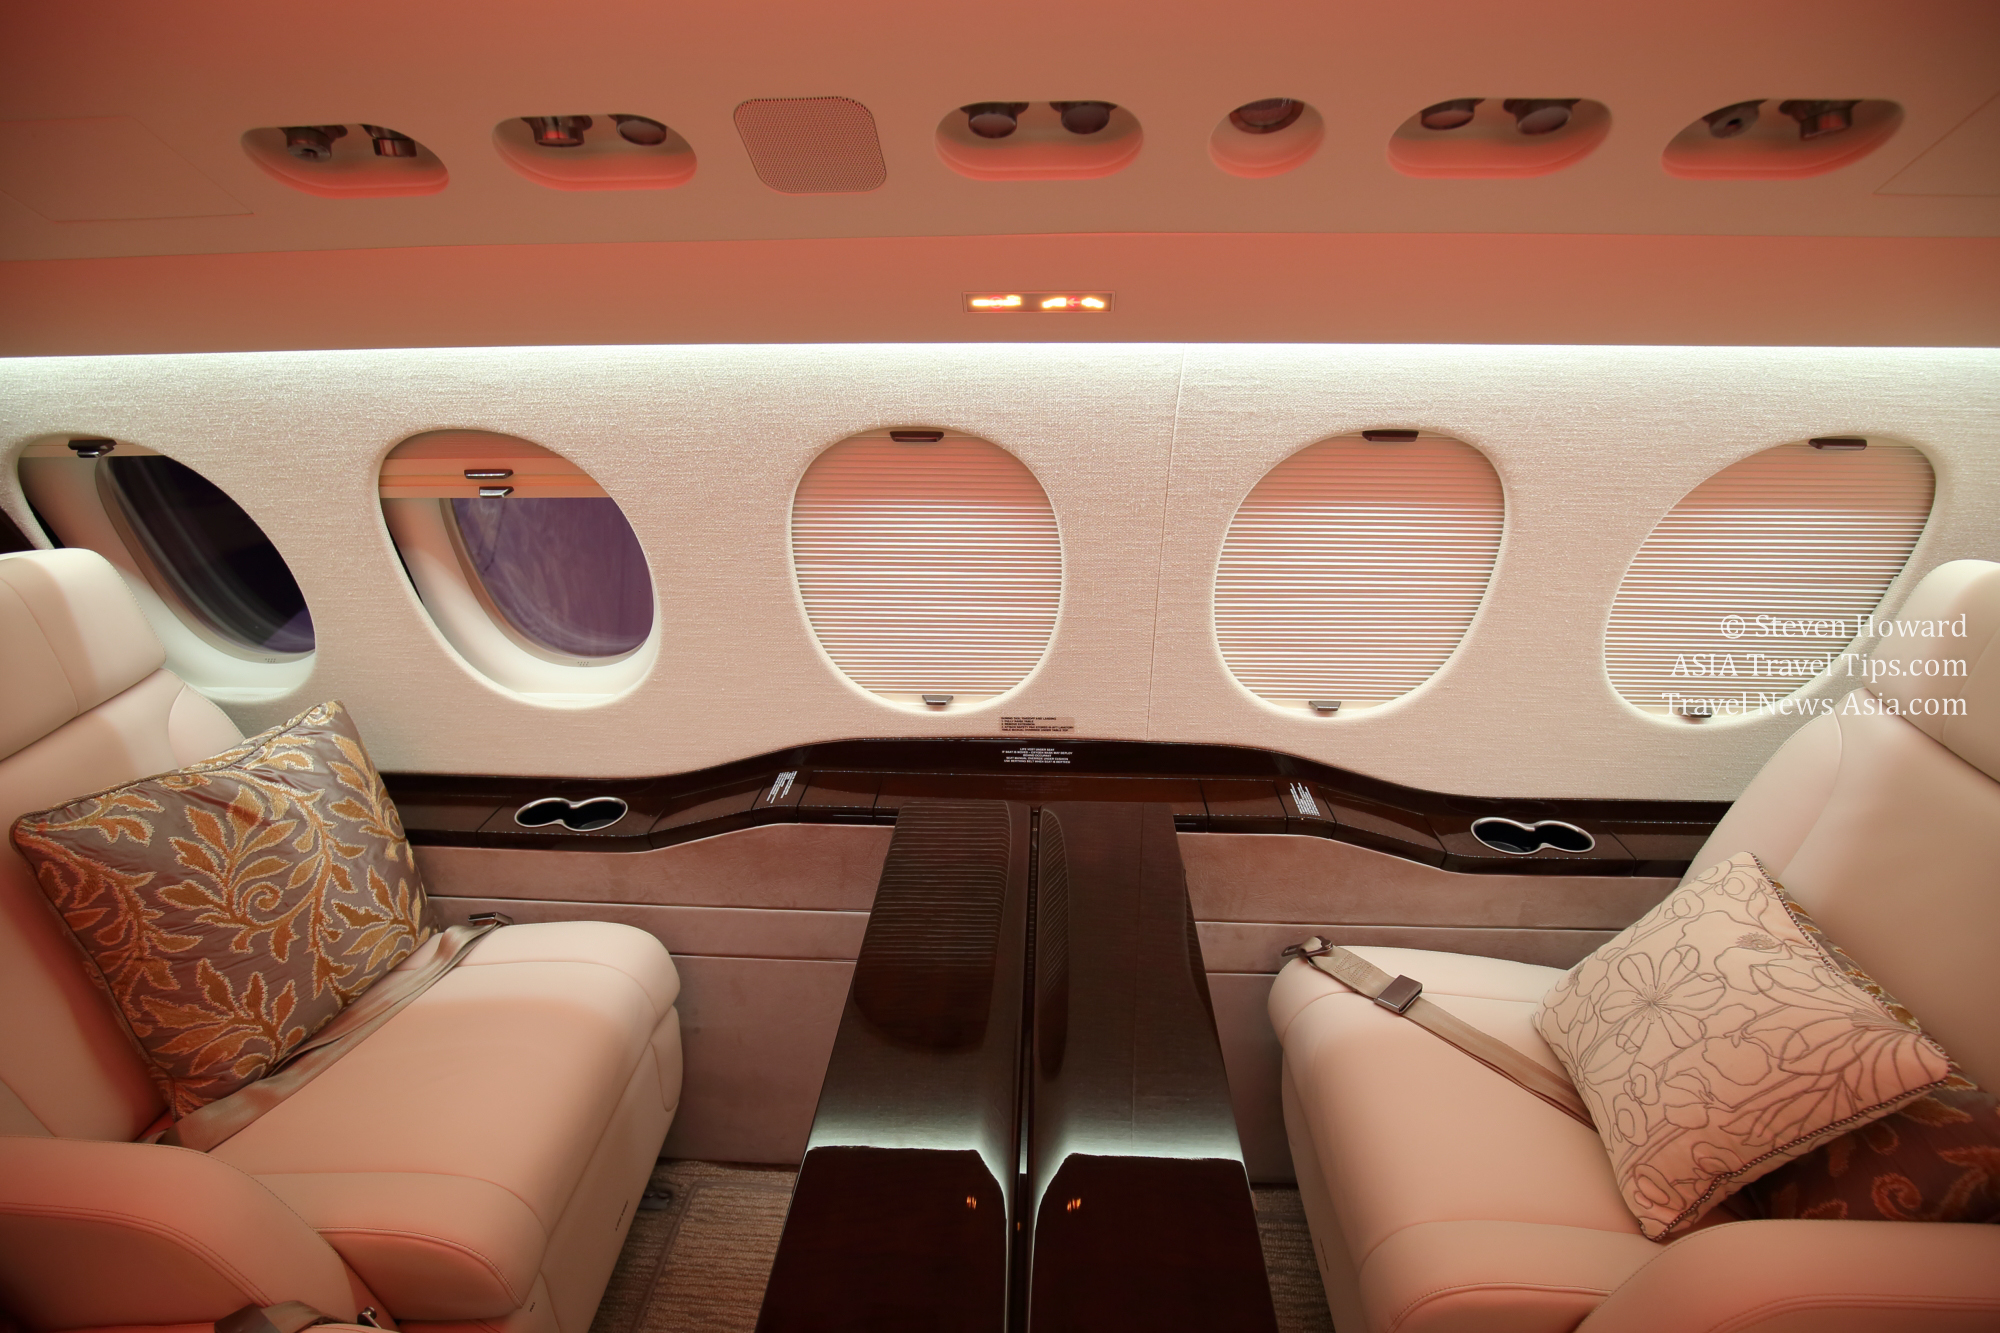 Luxurious seating onboard a Dassault Falcon 8X. Picture by Steven Howard of TravelNewsAsia.com Click to enlarge.